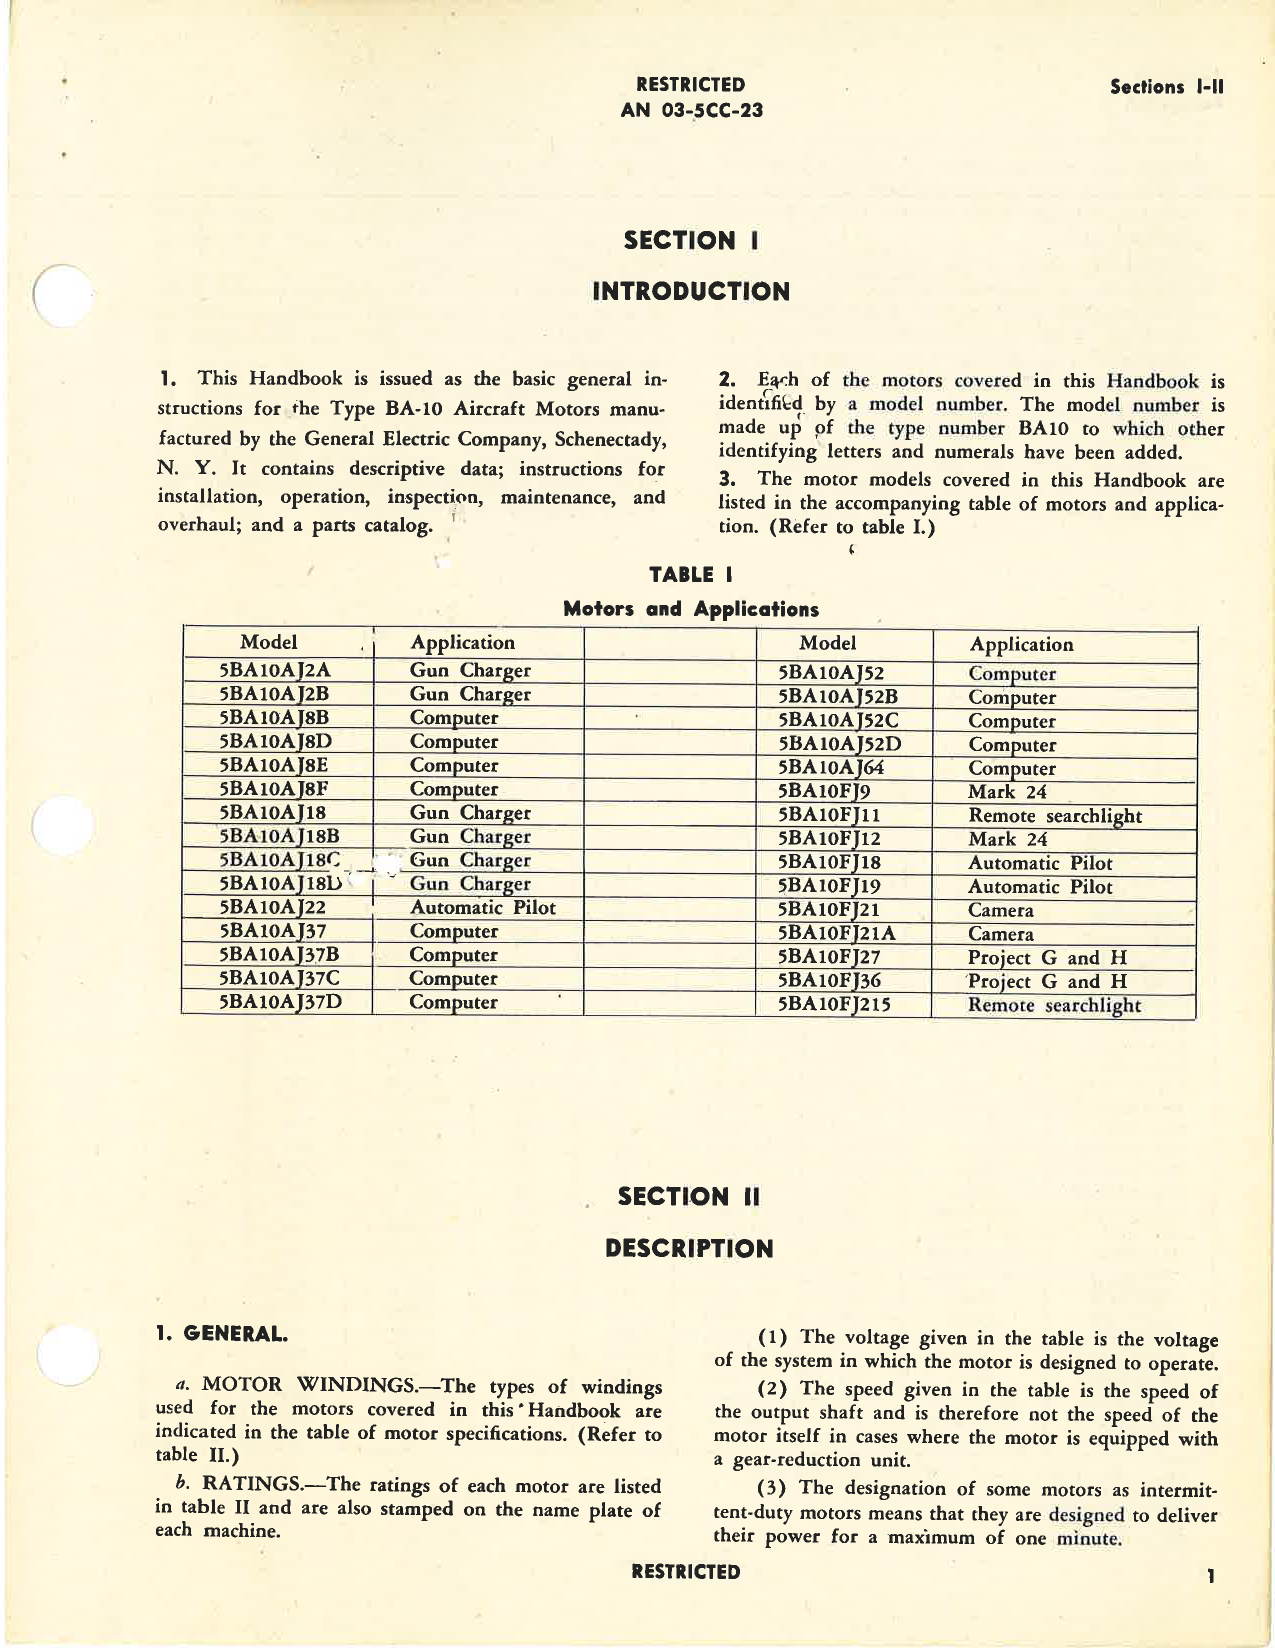 Sample page 7 from AirCorps Library document: Handbook of Instructions with Parts Catalog for Aircraft Electric Motors Model 5BA10 Series